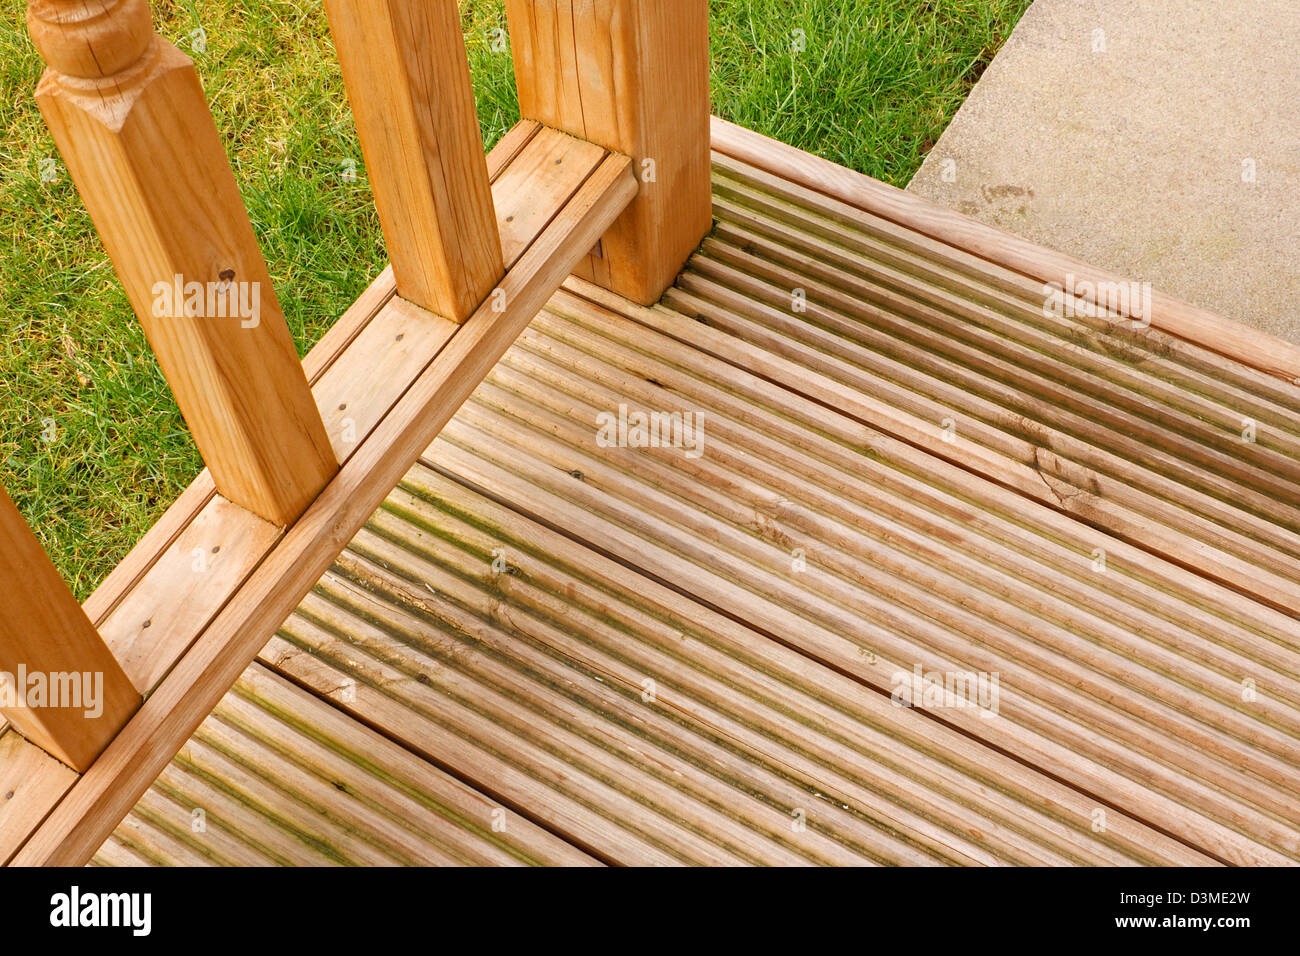 Corner profile of wooden garden decking a popular feature outside modern homes Stock Photo